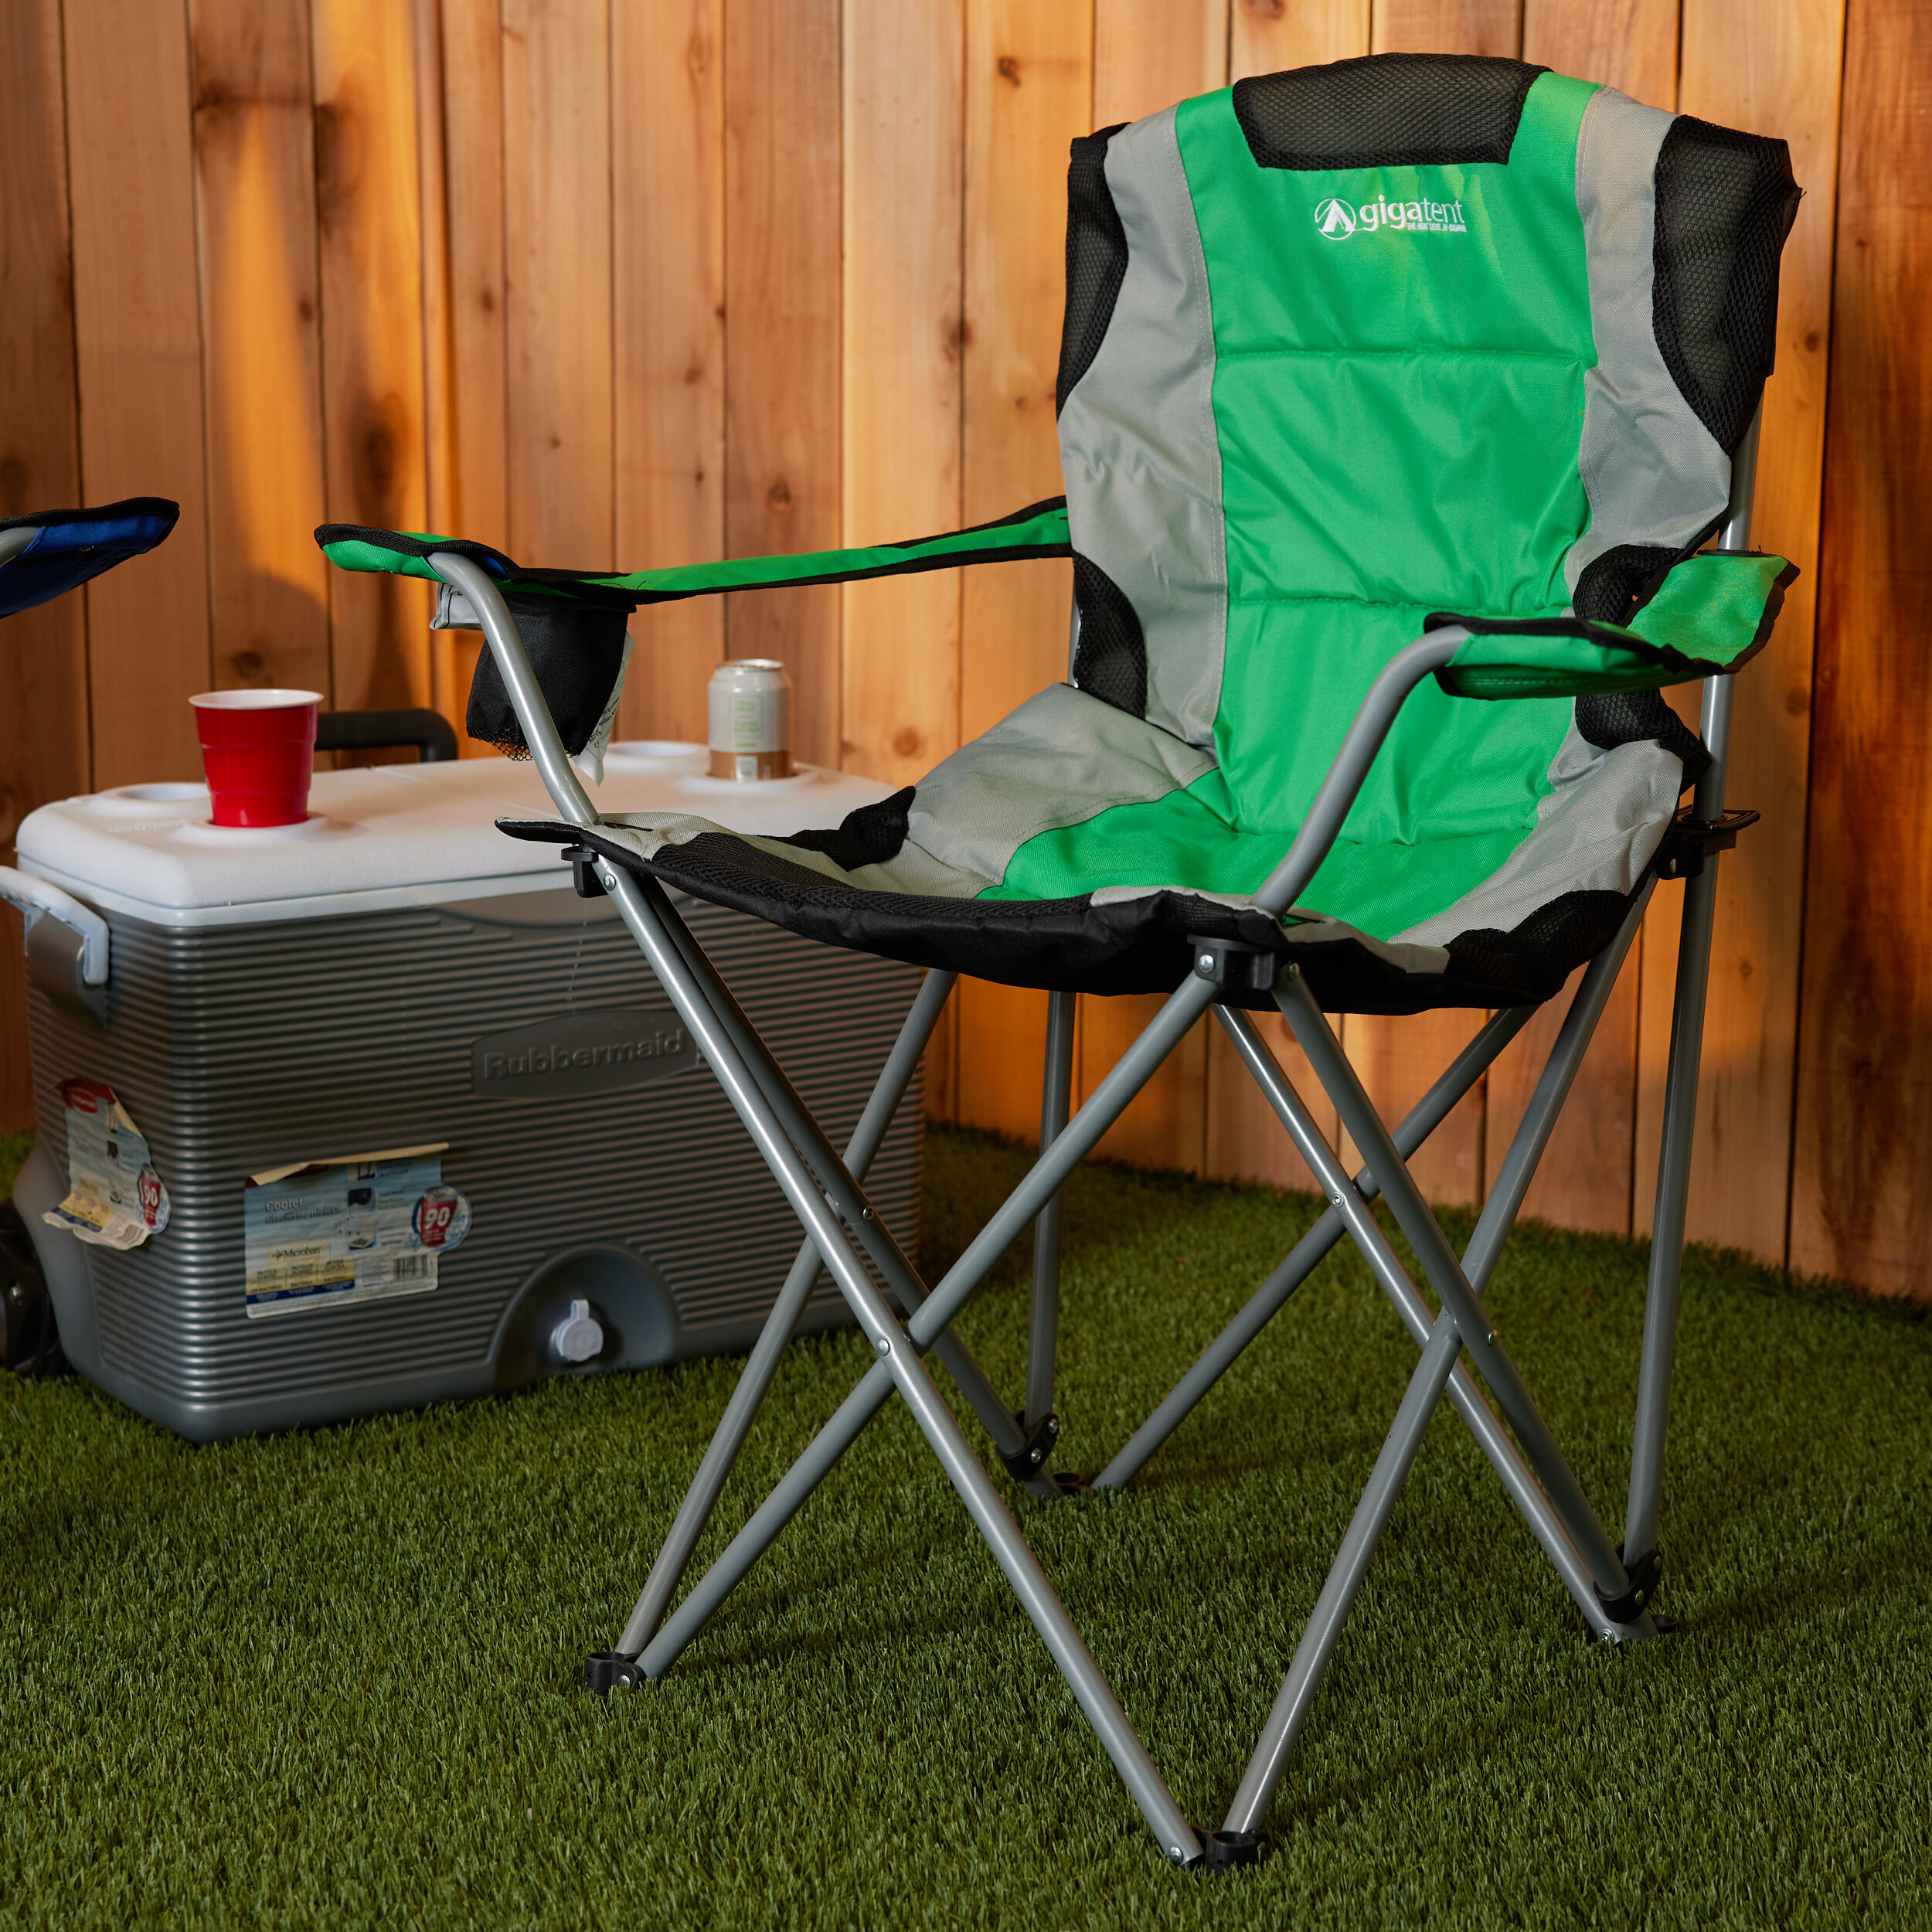 Gigatent Backpack Cooler Stool - Collapsible Folding Camping Chair